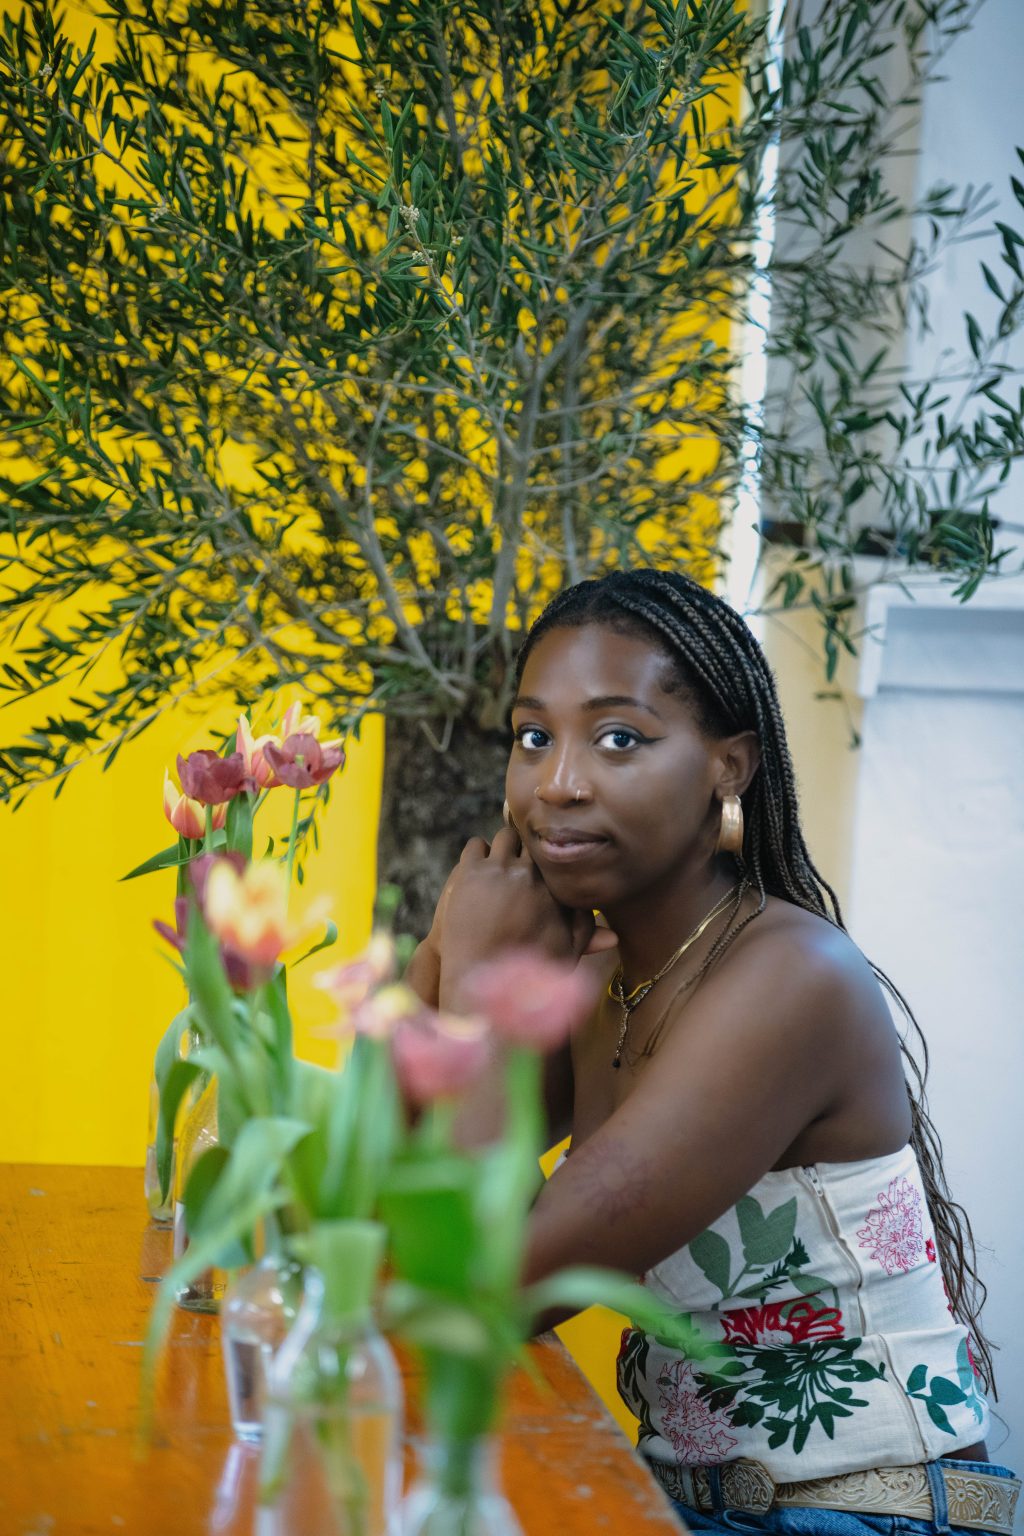 A black woman with braided hair poses on an indoor picnic bench. There is a large houseplant behind her and several glasses vases of tulips in front of her. She is leaning on the table top with her head turned over her shoulder and towards the camera.